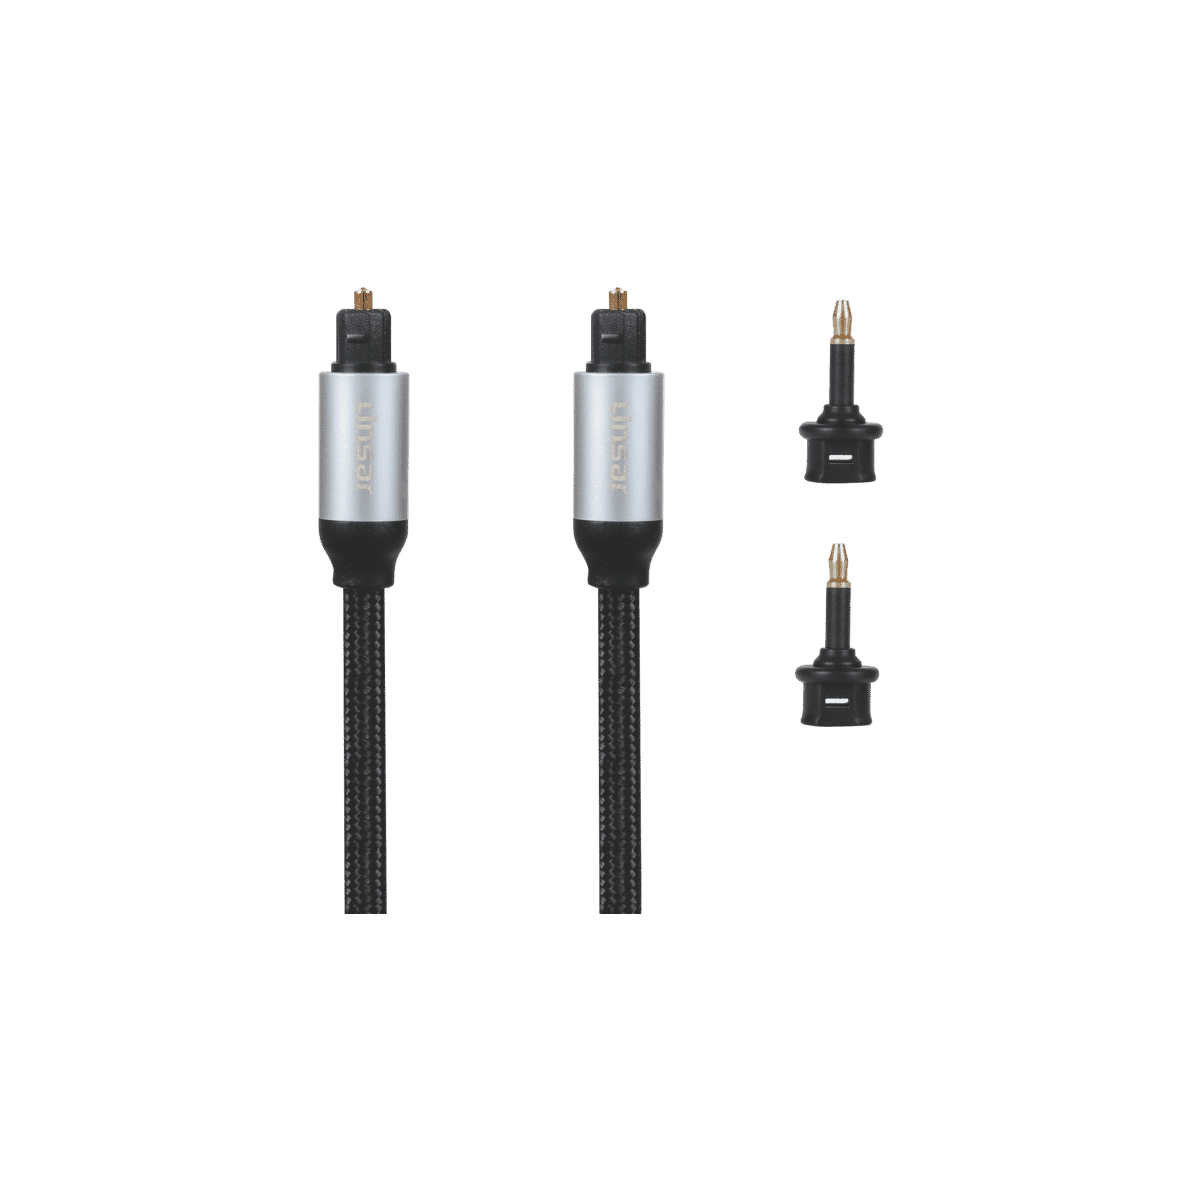 Linsar LSSAUR35 Stereo Audio Cable (RCA 3.5mm) 1.5m at The Good Guys